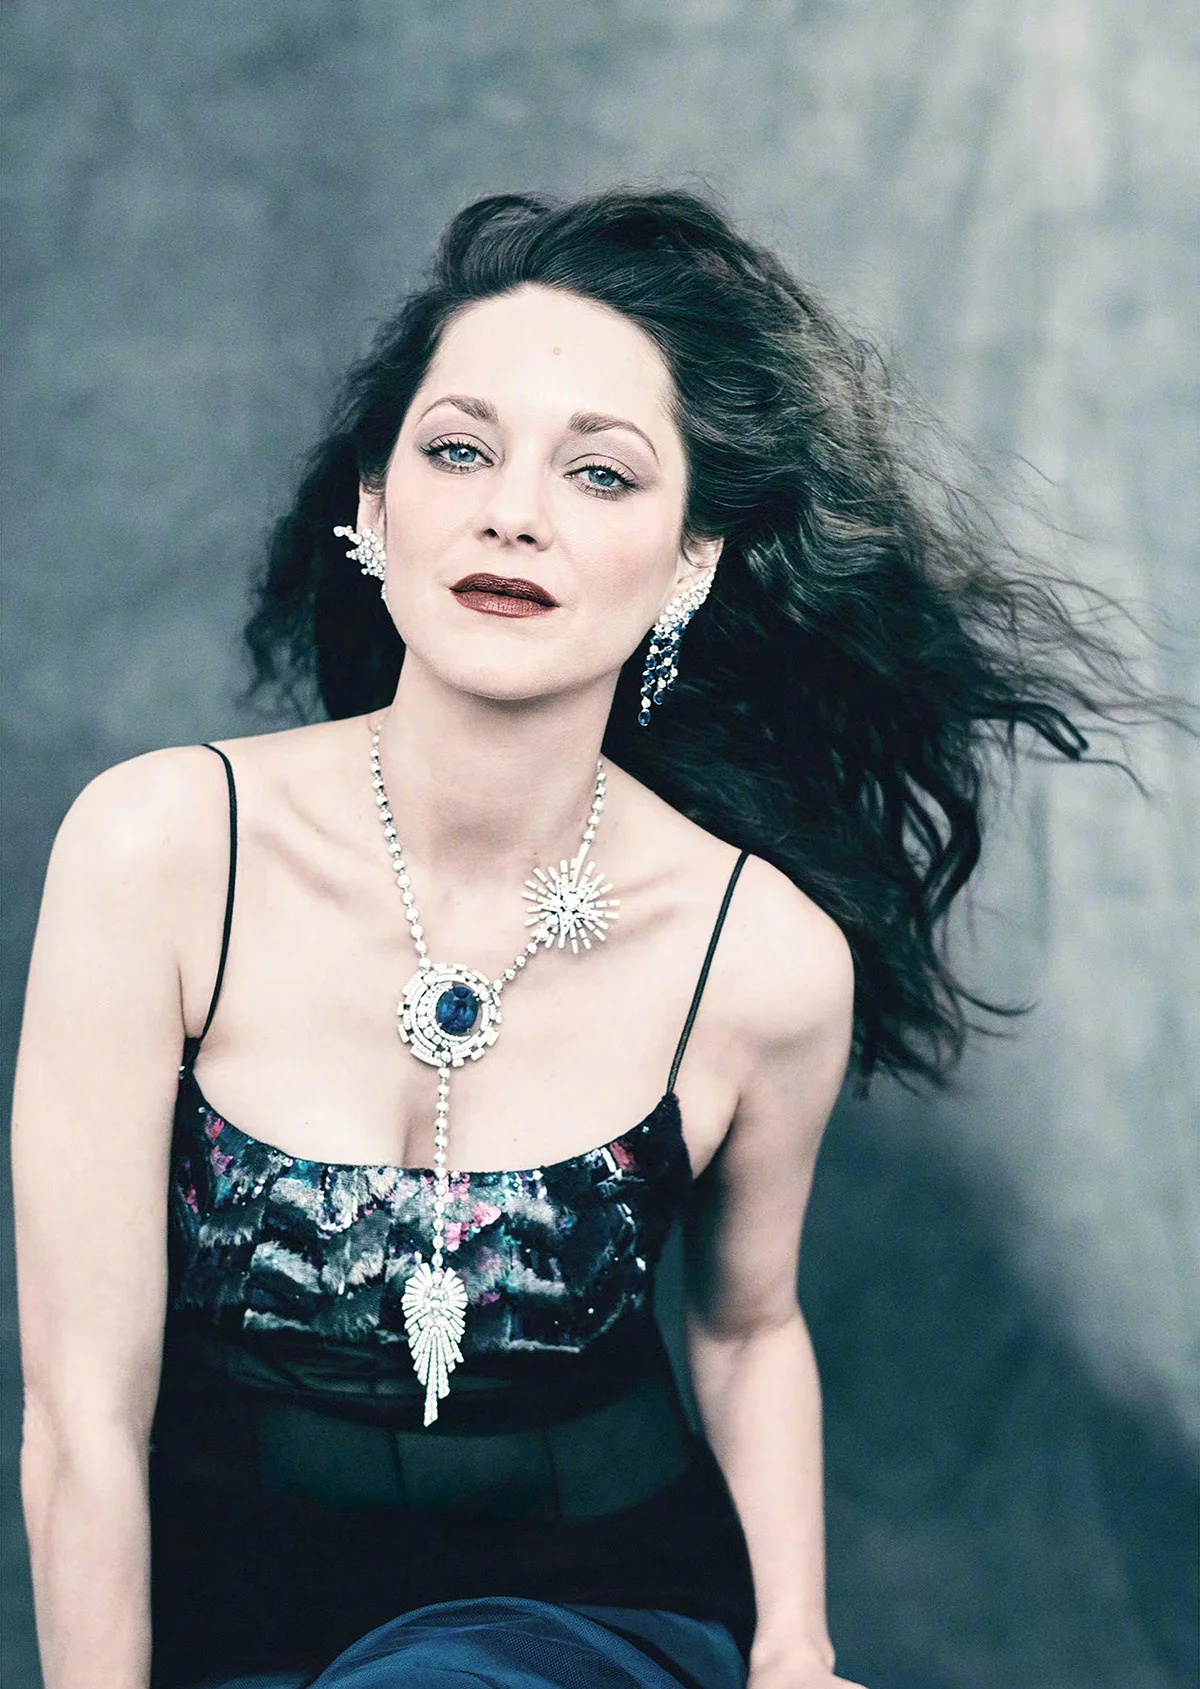 Marion Cotillard in Chanel on Vogue China June 2022 by Paolo Roversi